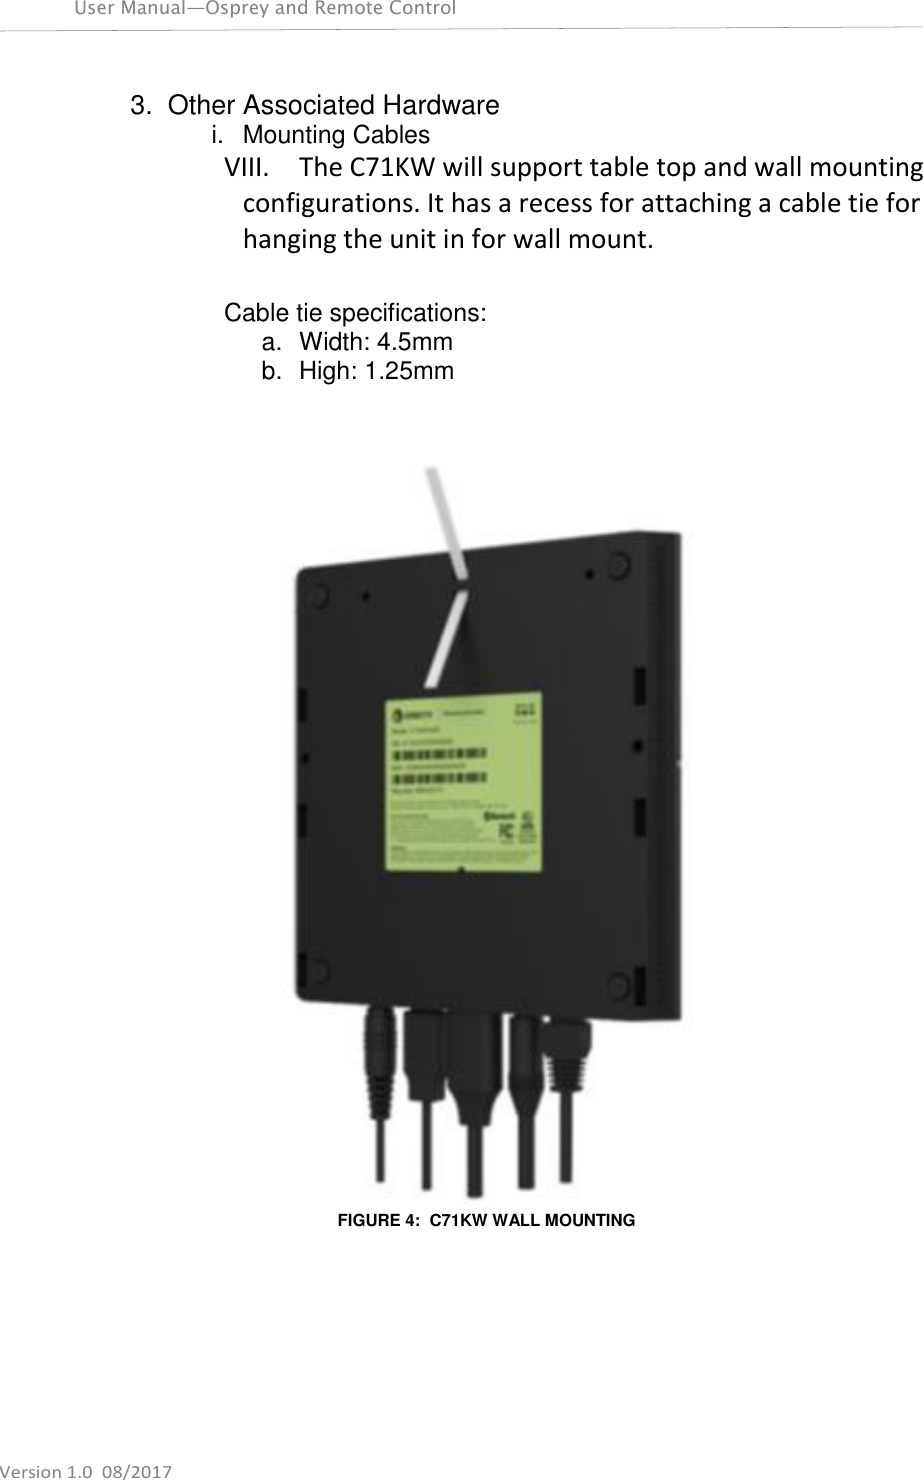 User Manual—Osprey and Remote Control    Version 1.0  08/2017 3. Other Associated Hardware i.  Mounting Cables VIII. The C71KW will support table top and wall mounting configurations. It has a recess for attaching a cable tie for hanging the unit in for wall mount.  Cable tie specifications: a.  Width: 4.5mm b.  High: 1.25mm    FIGURE 4:  C71KW WALL MOUNTING     